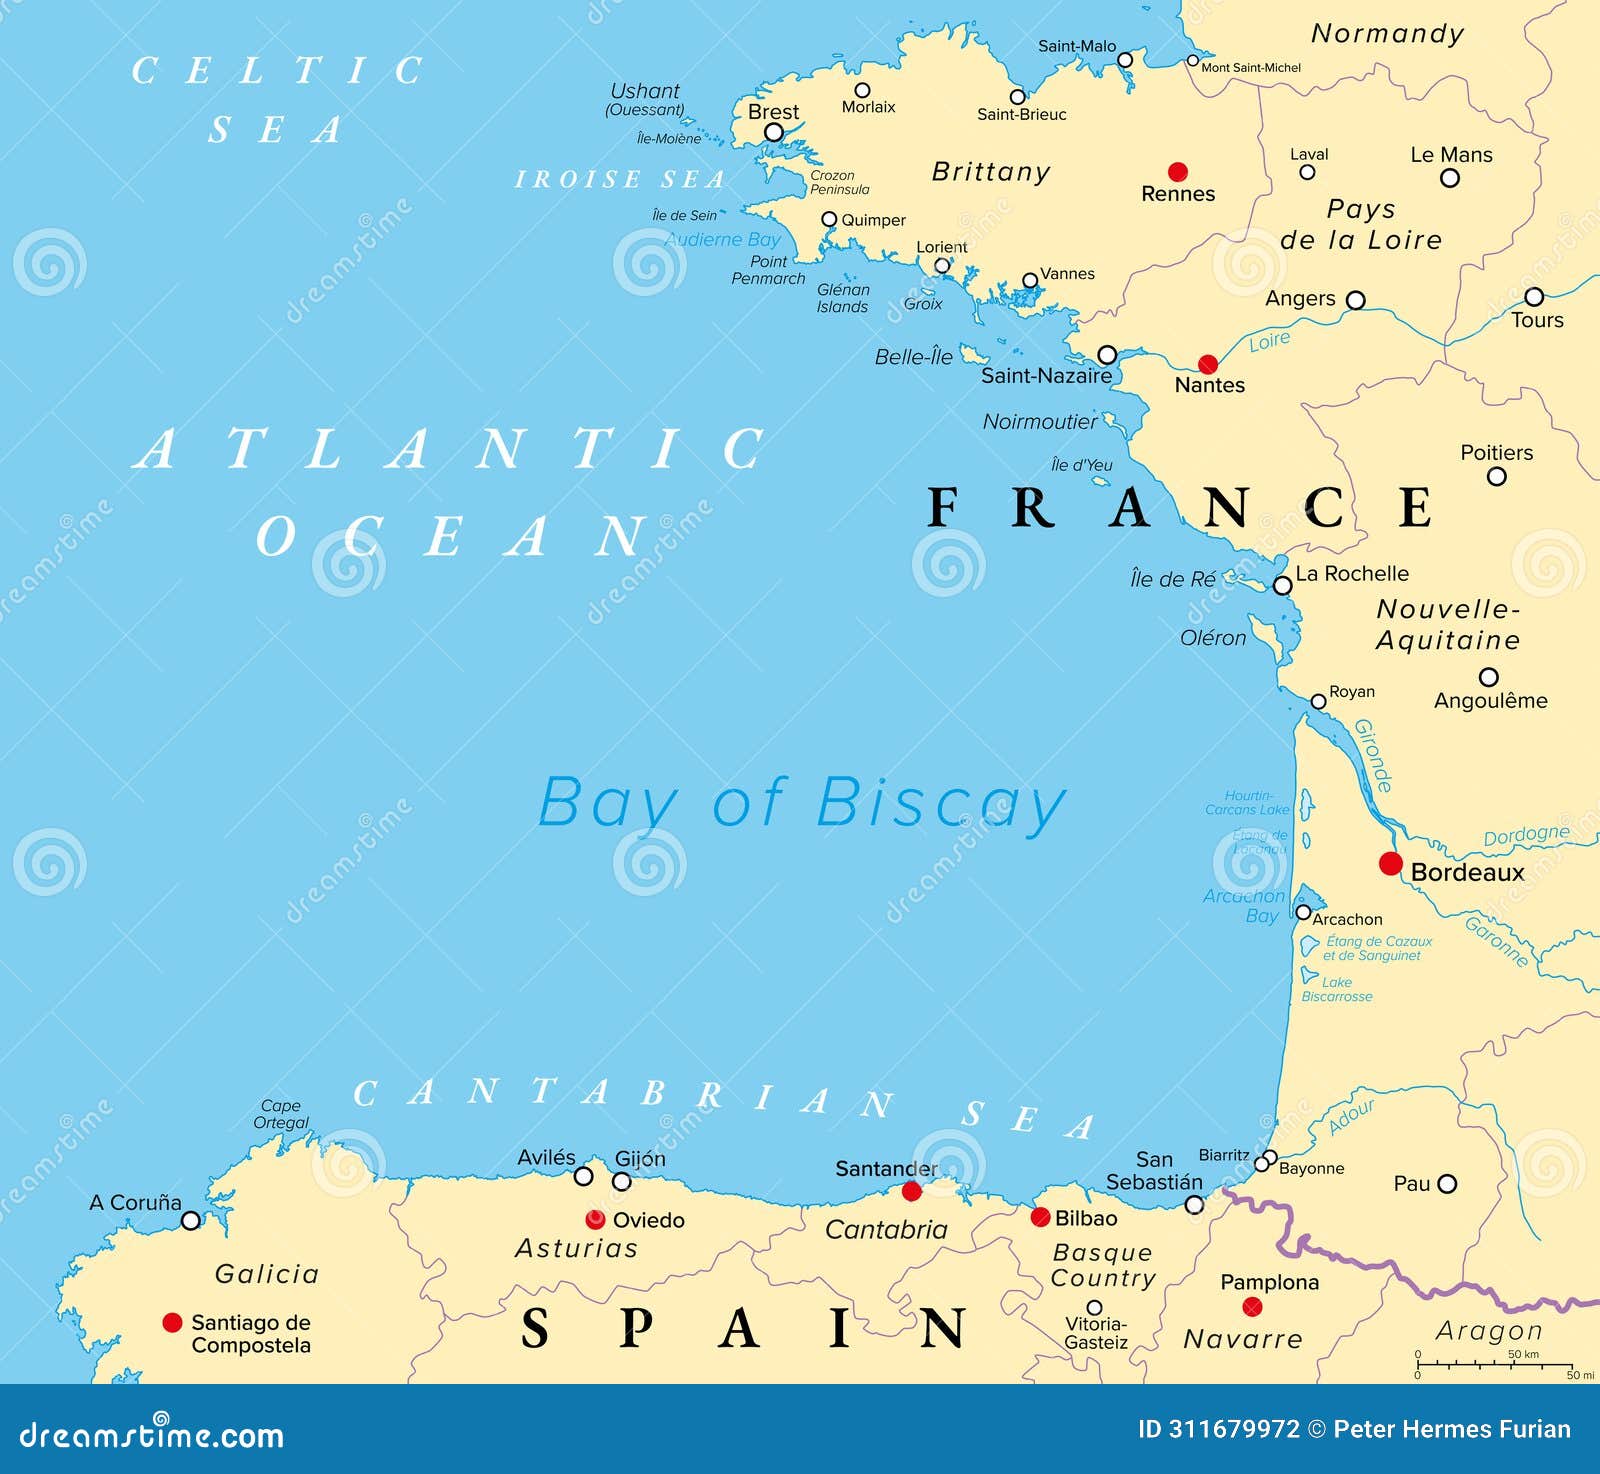 bay of biscay, also known as gulf of gascony, political map